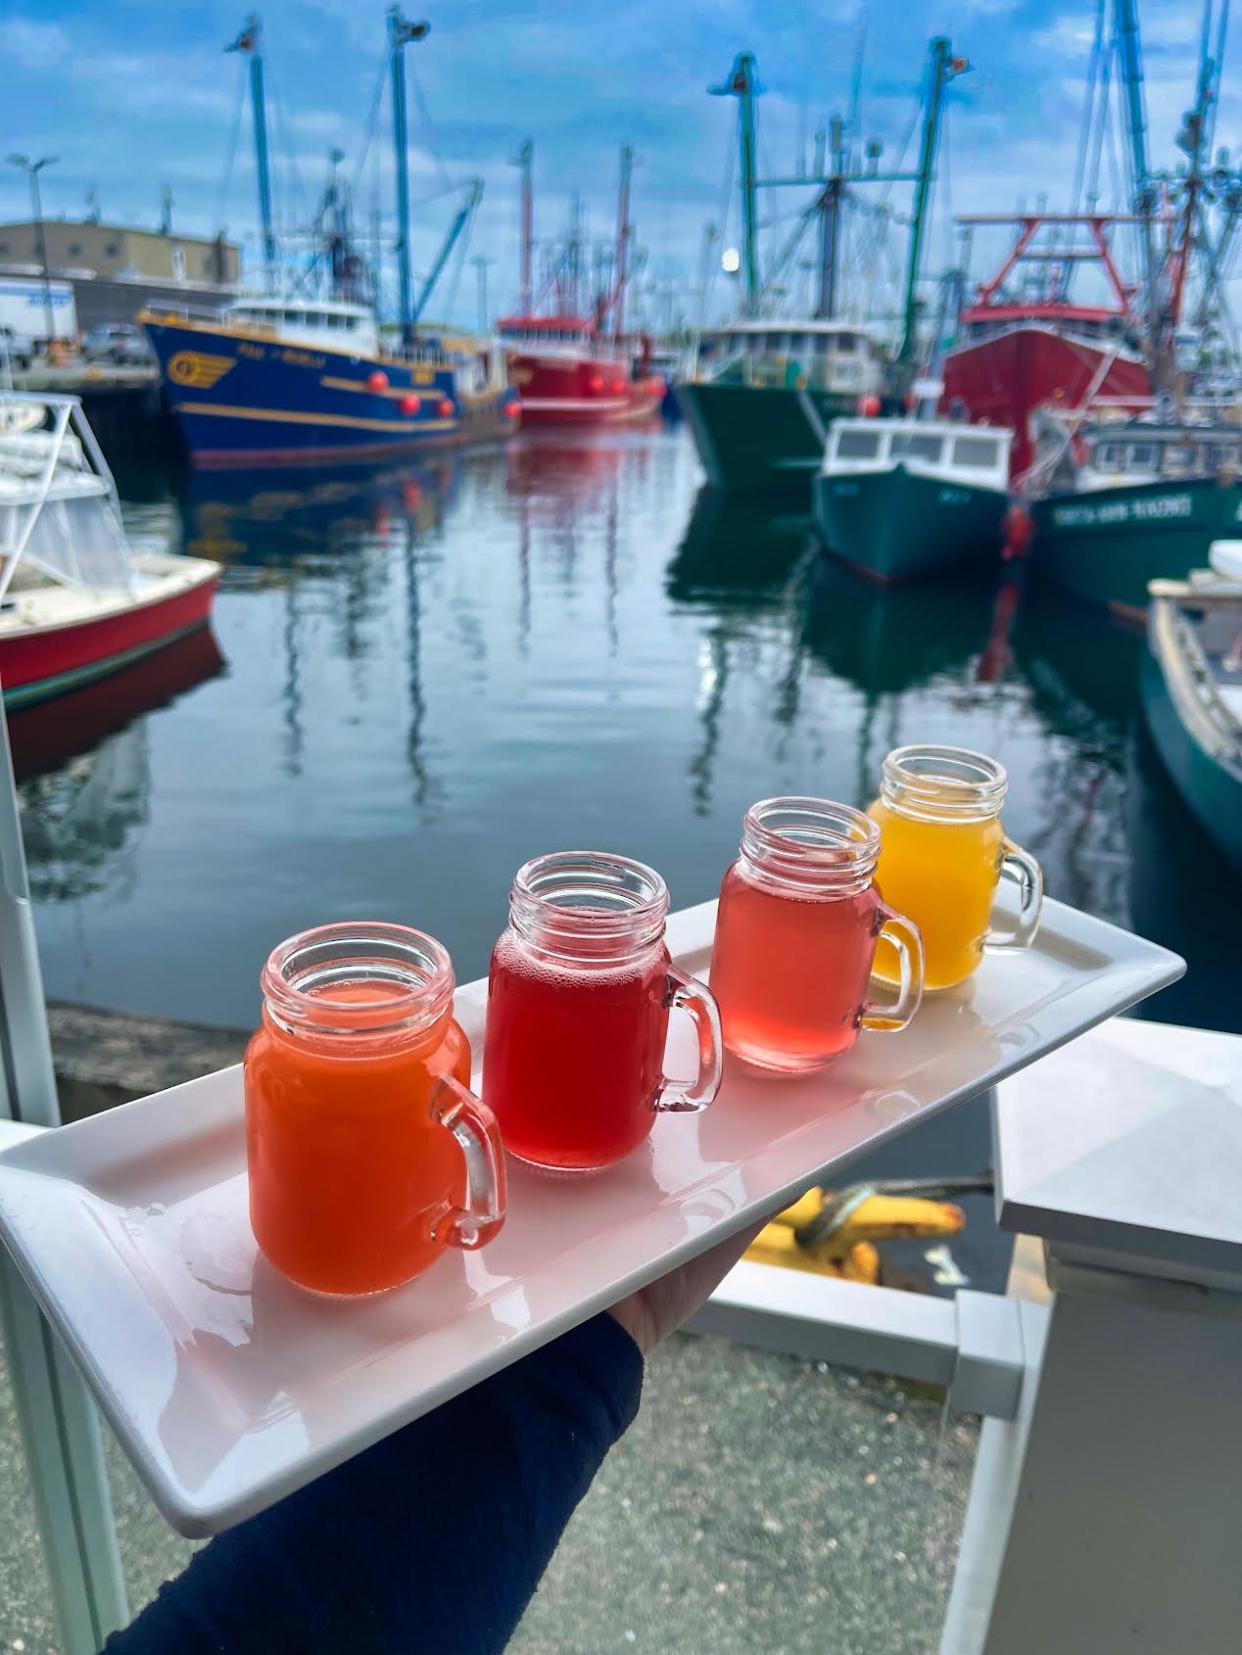 Merrill's at the Waterfront offers a flight of different flavor mimosas during their brunch.